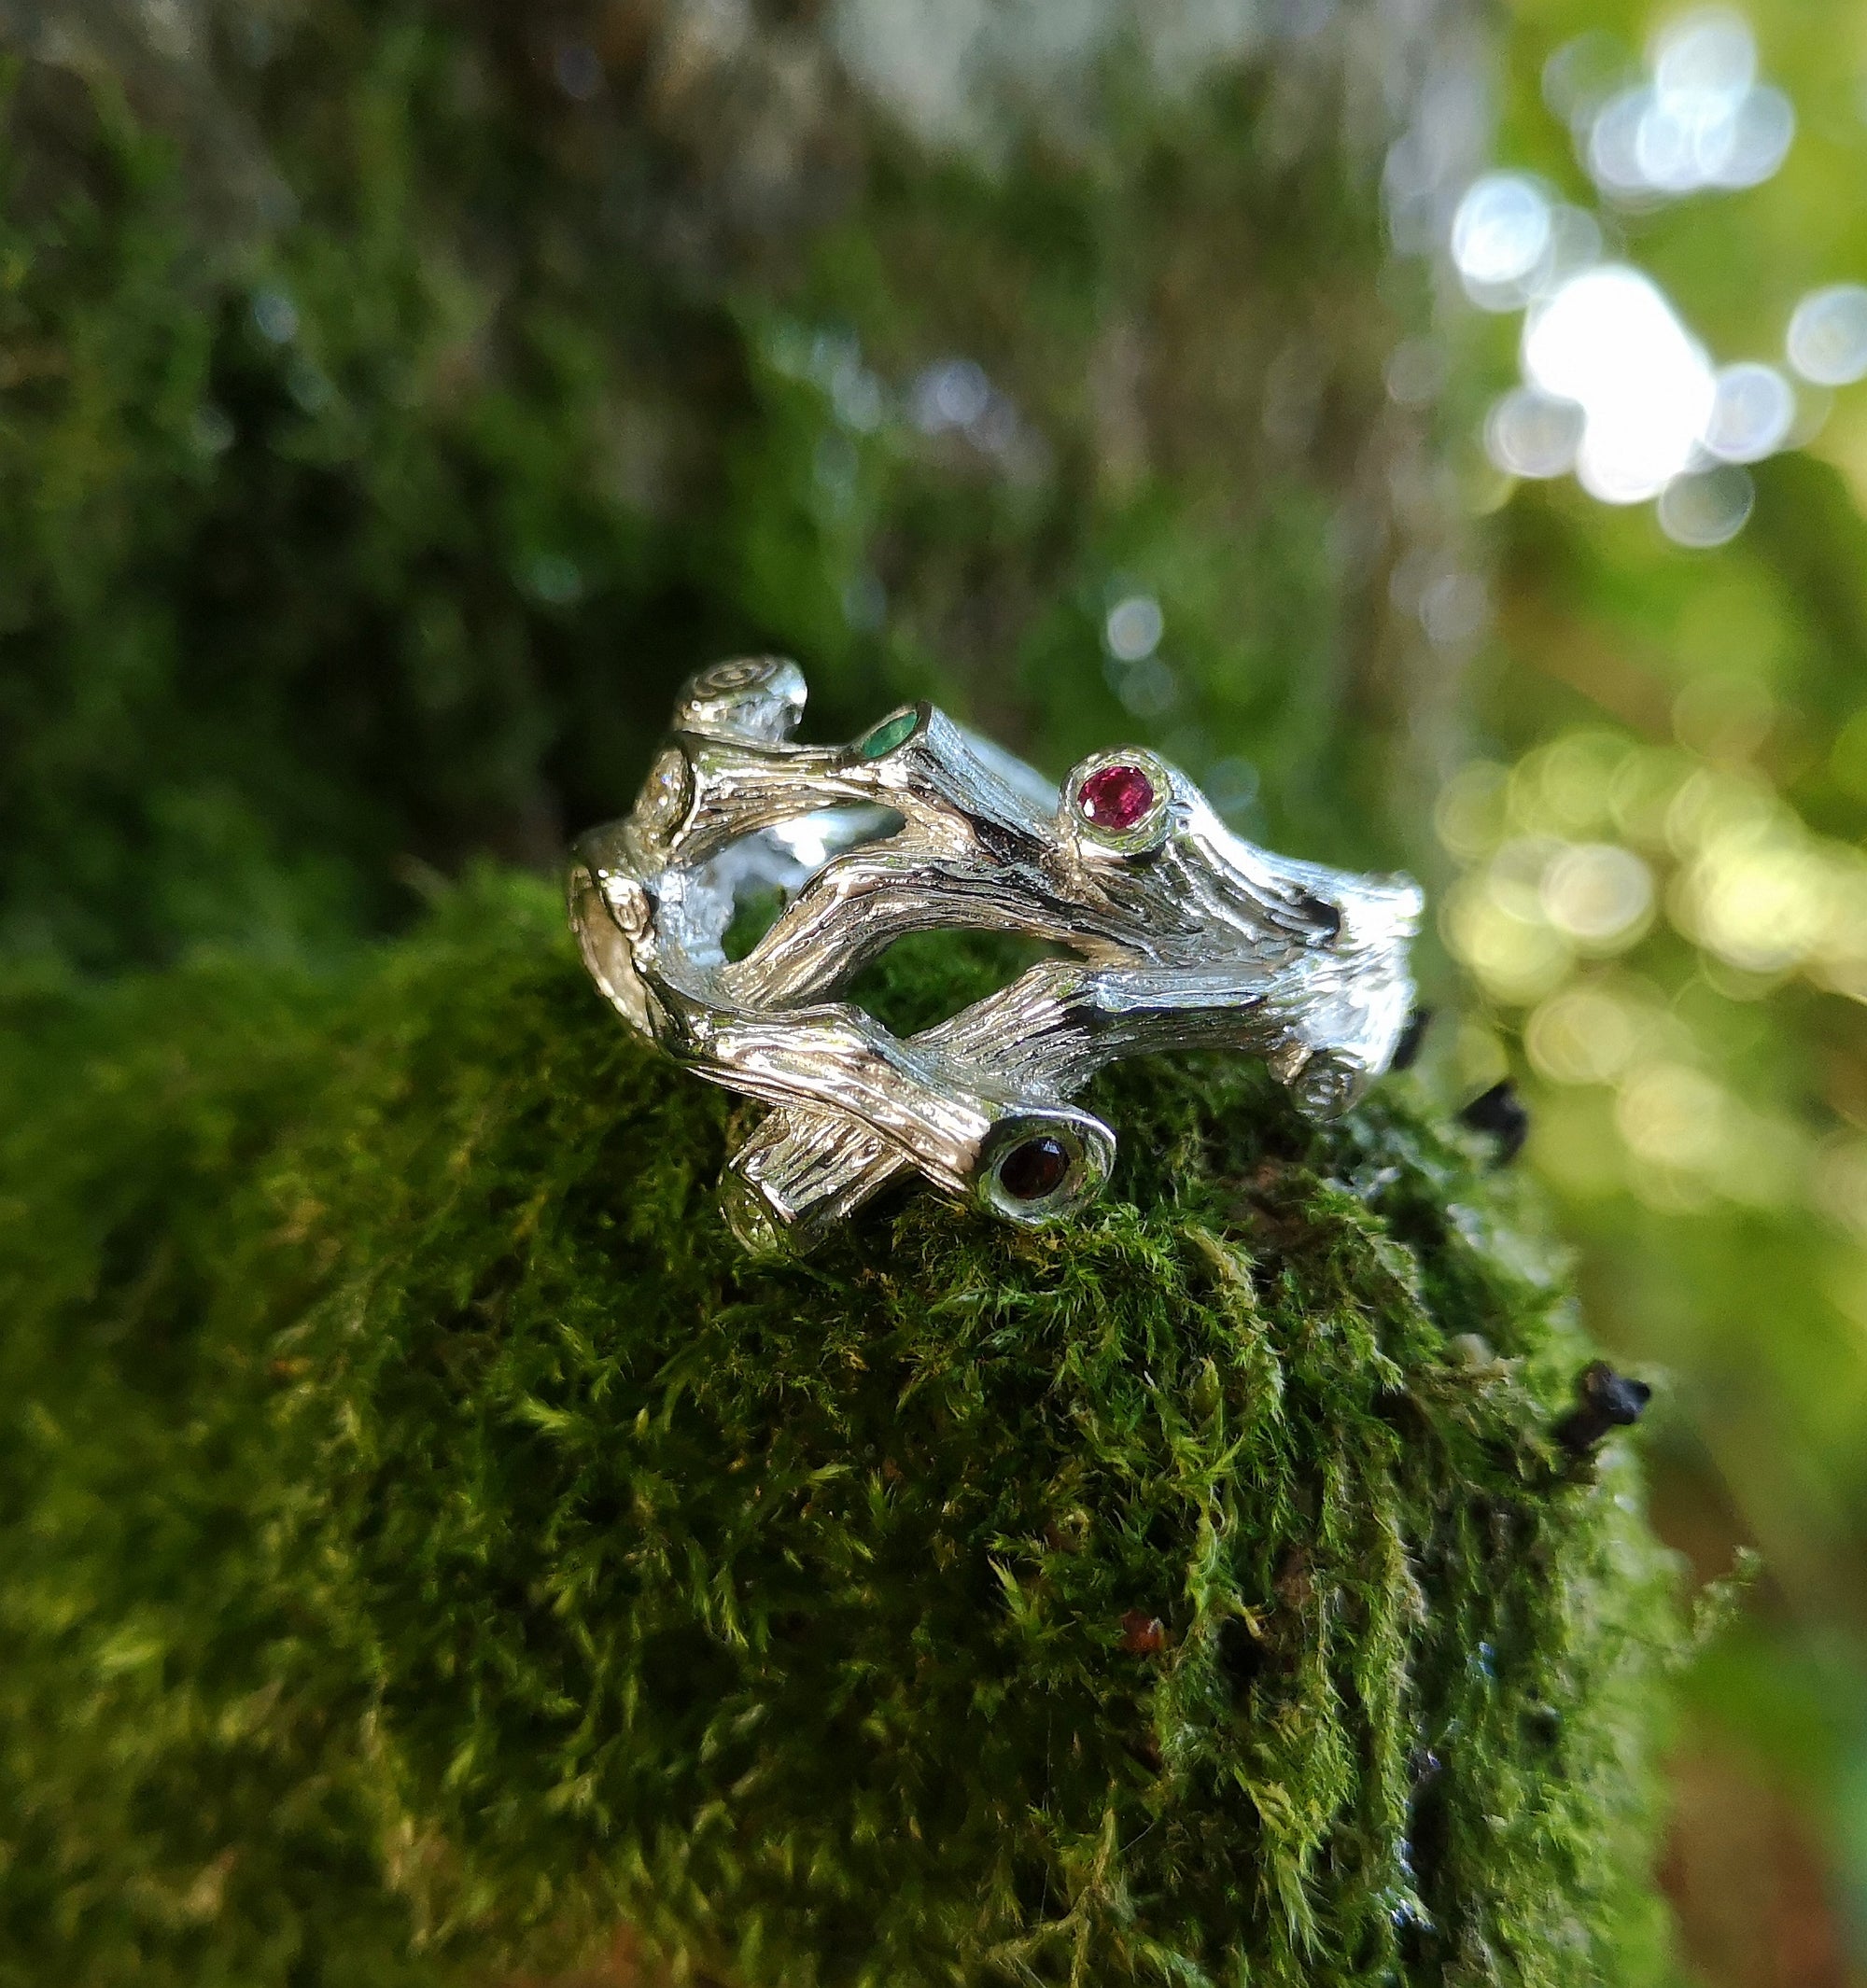 A sterling silver family birthstones ring in the shape of twigs that can also function as an Irish wedding ring or promise ring.